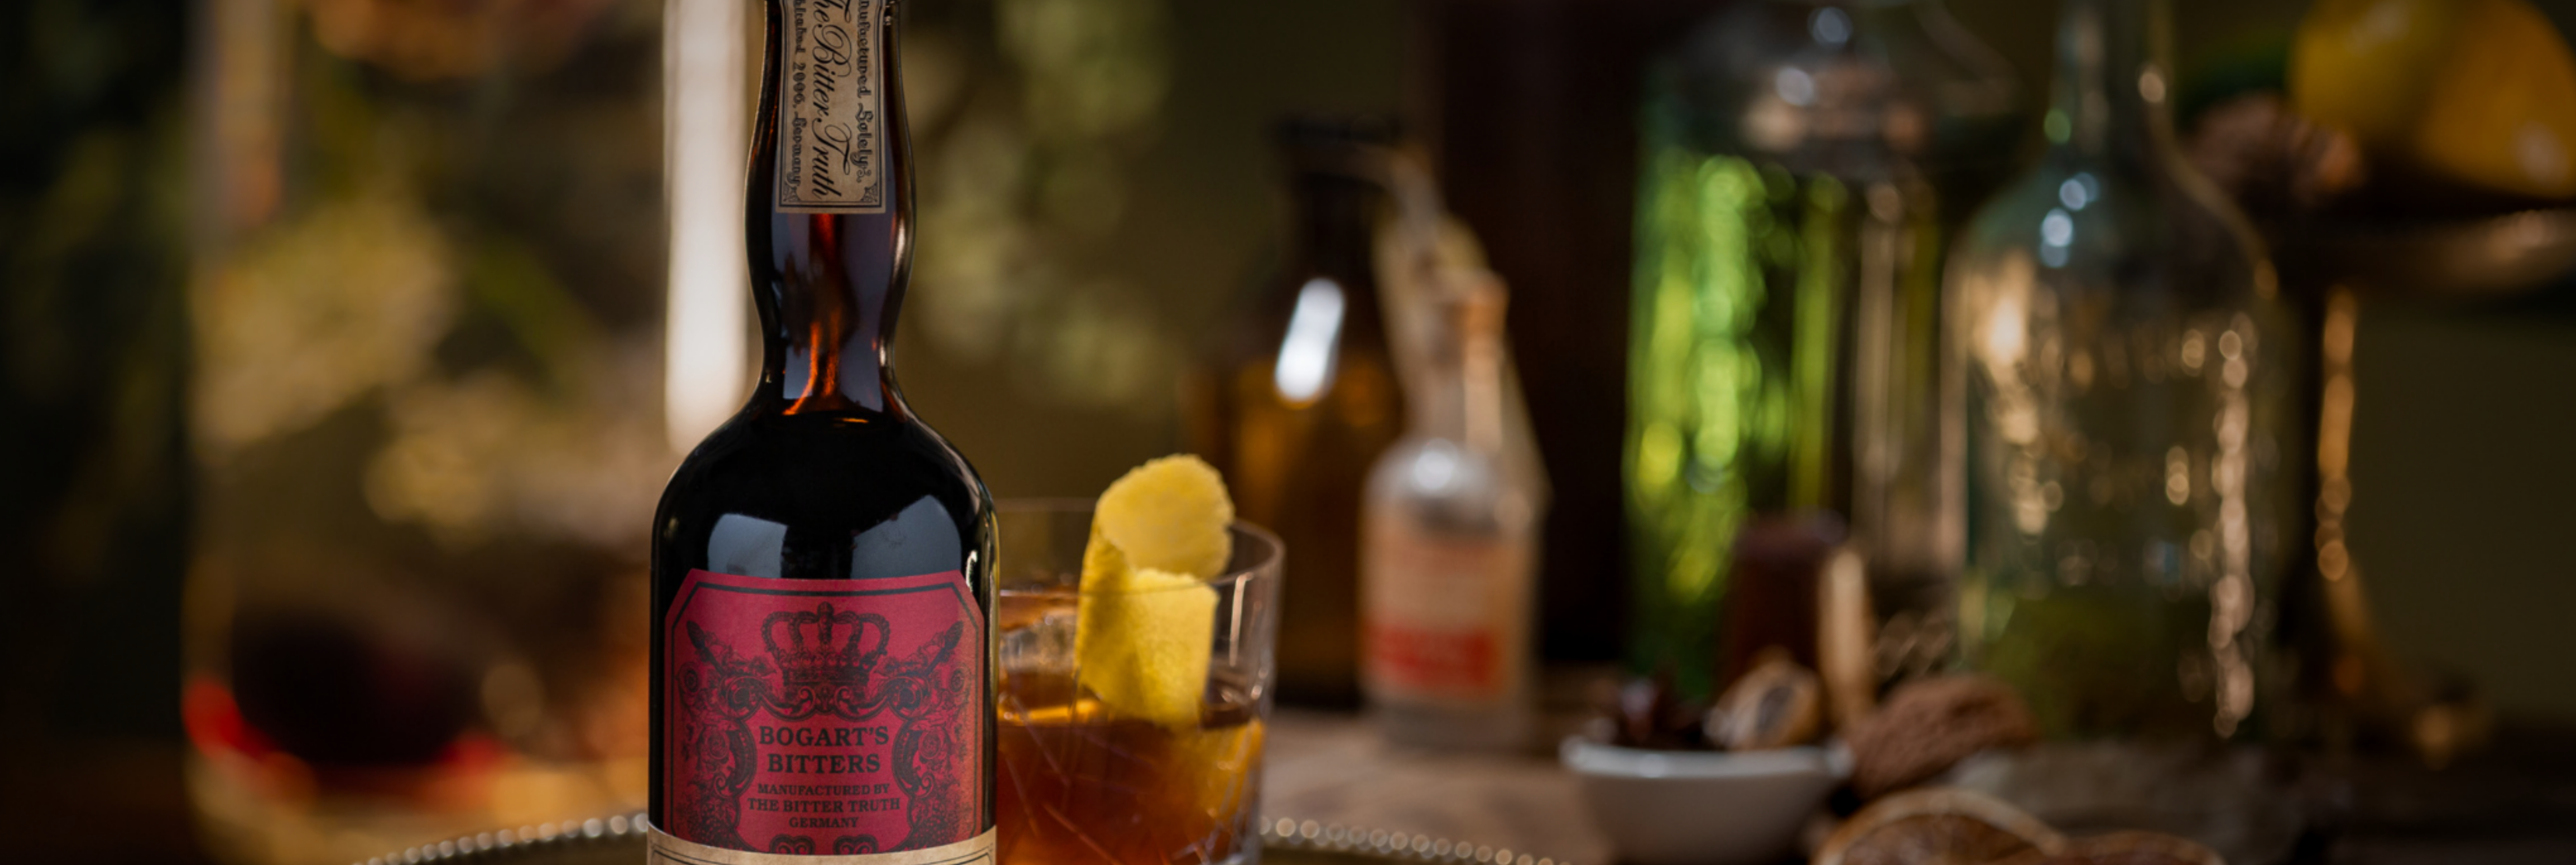 leading brands of amaro and bitters in Europe with Natural Origins